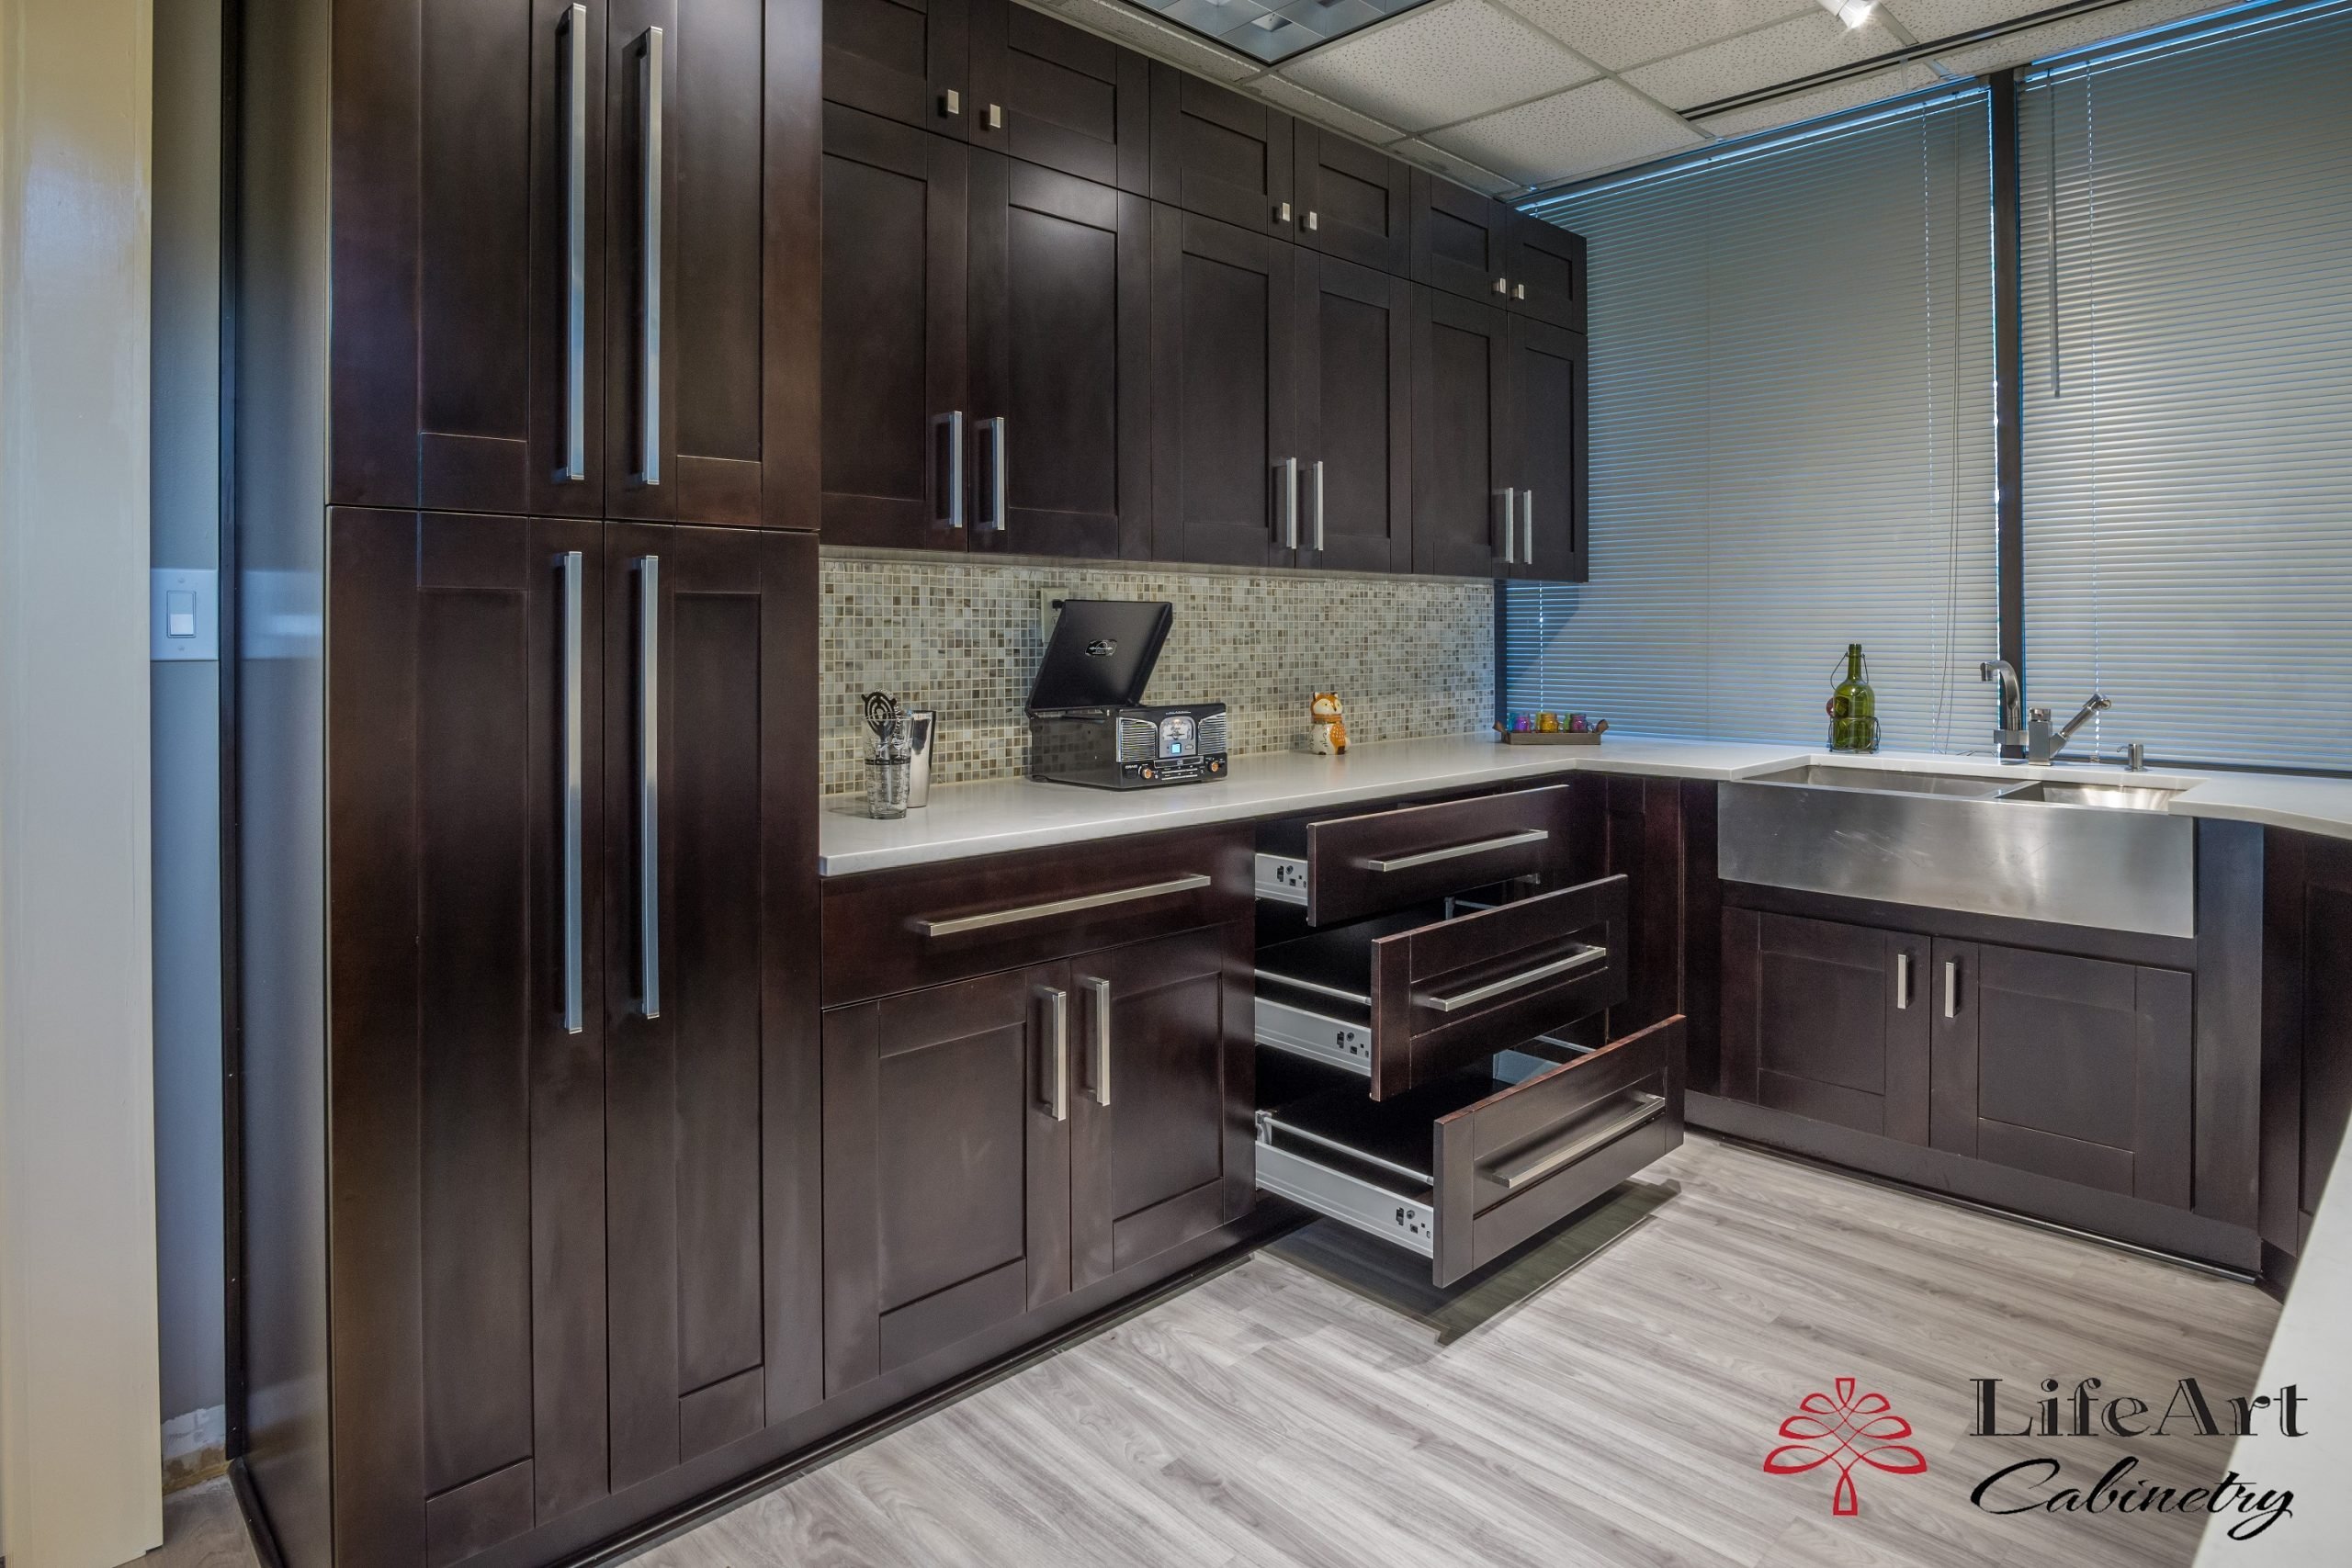 Life Art Cabinetry,Kitchen Cabinets,kitchen